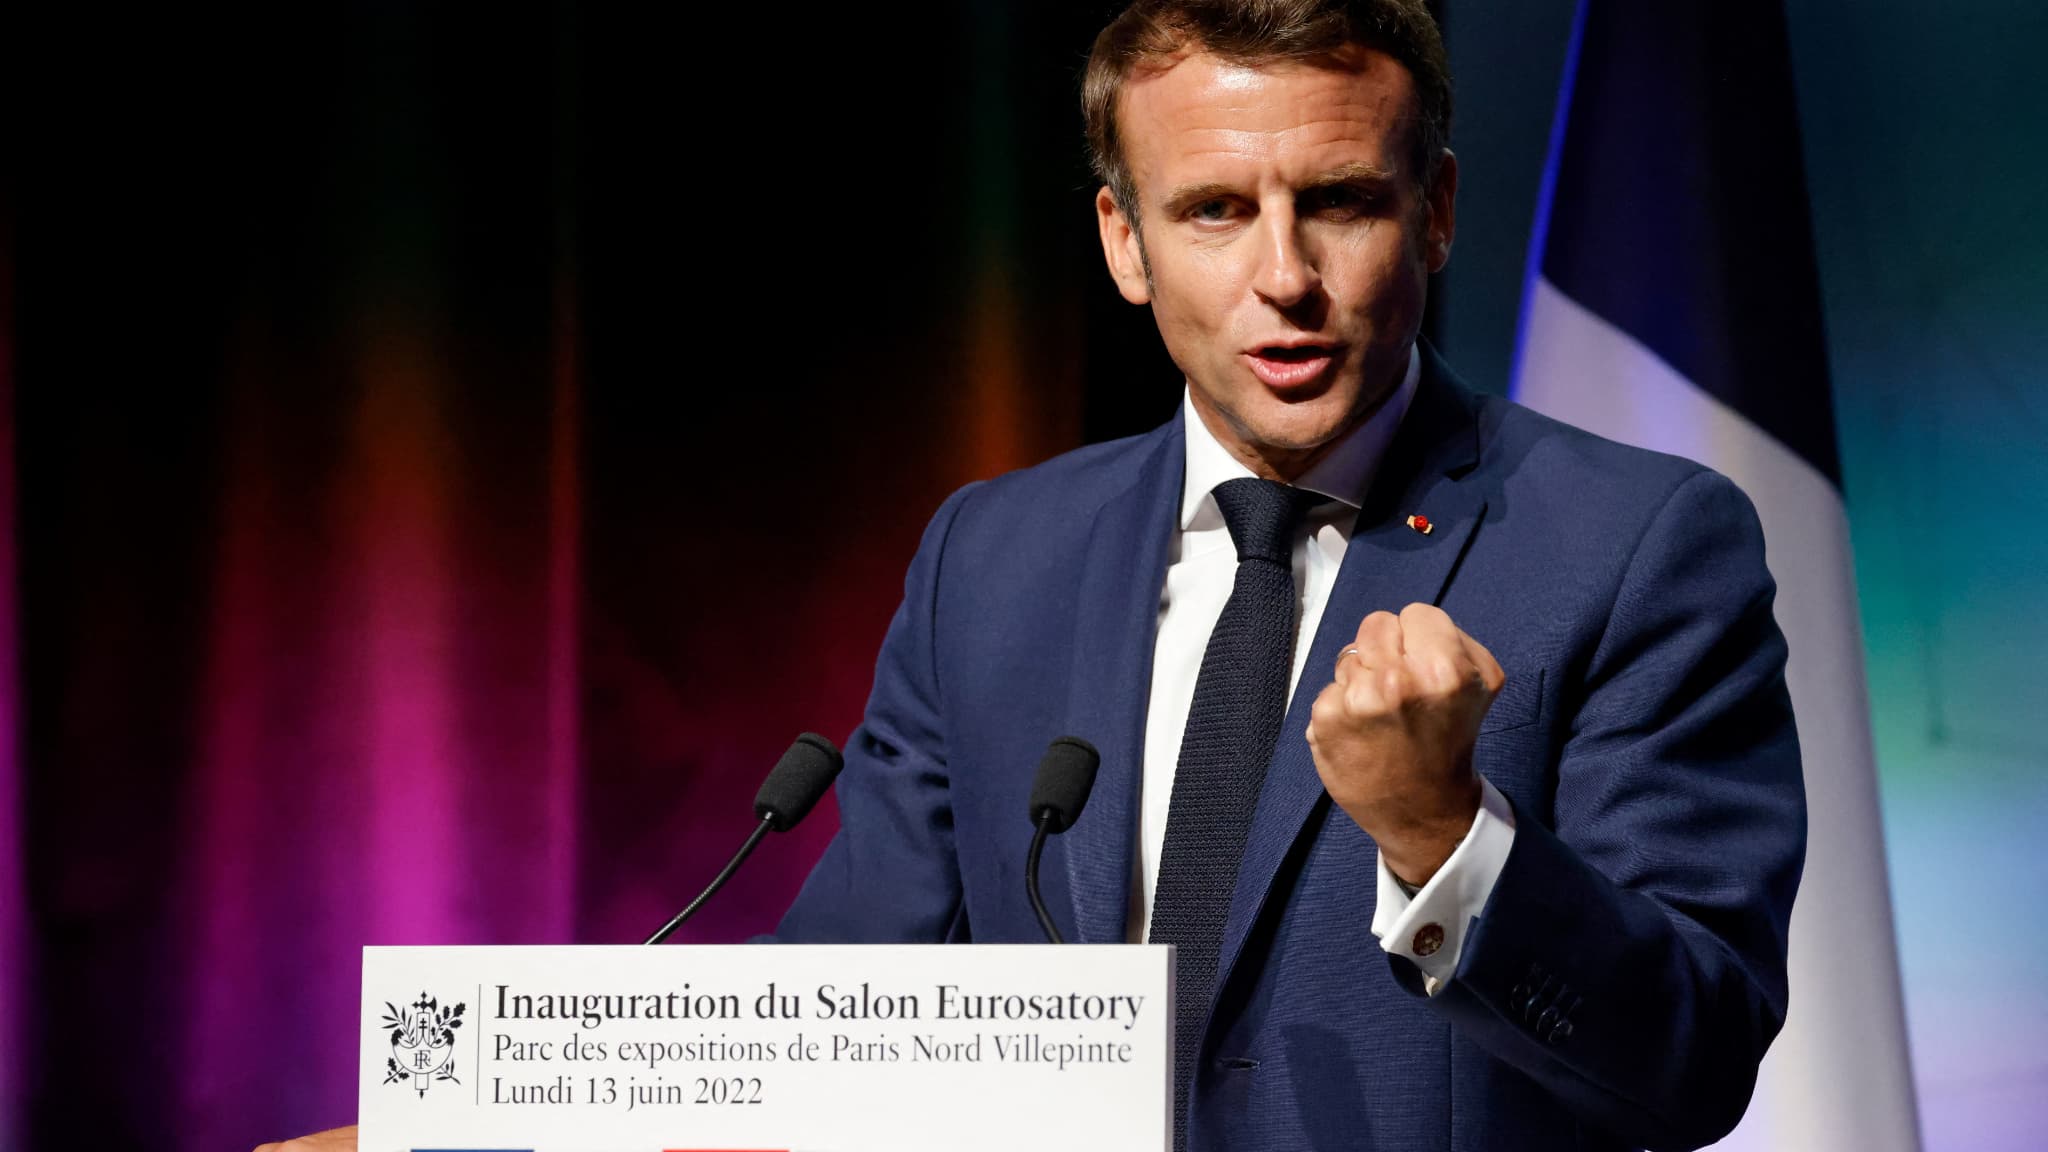 Live – War in Ukraine: Macron wants to “fix” the army to “threats”